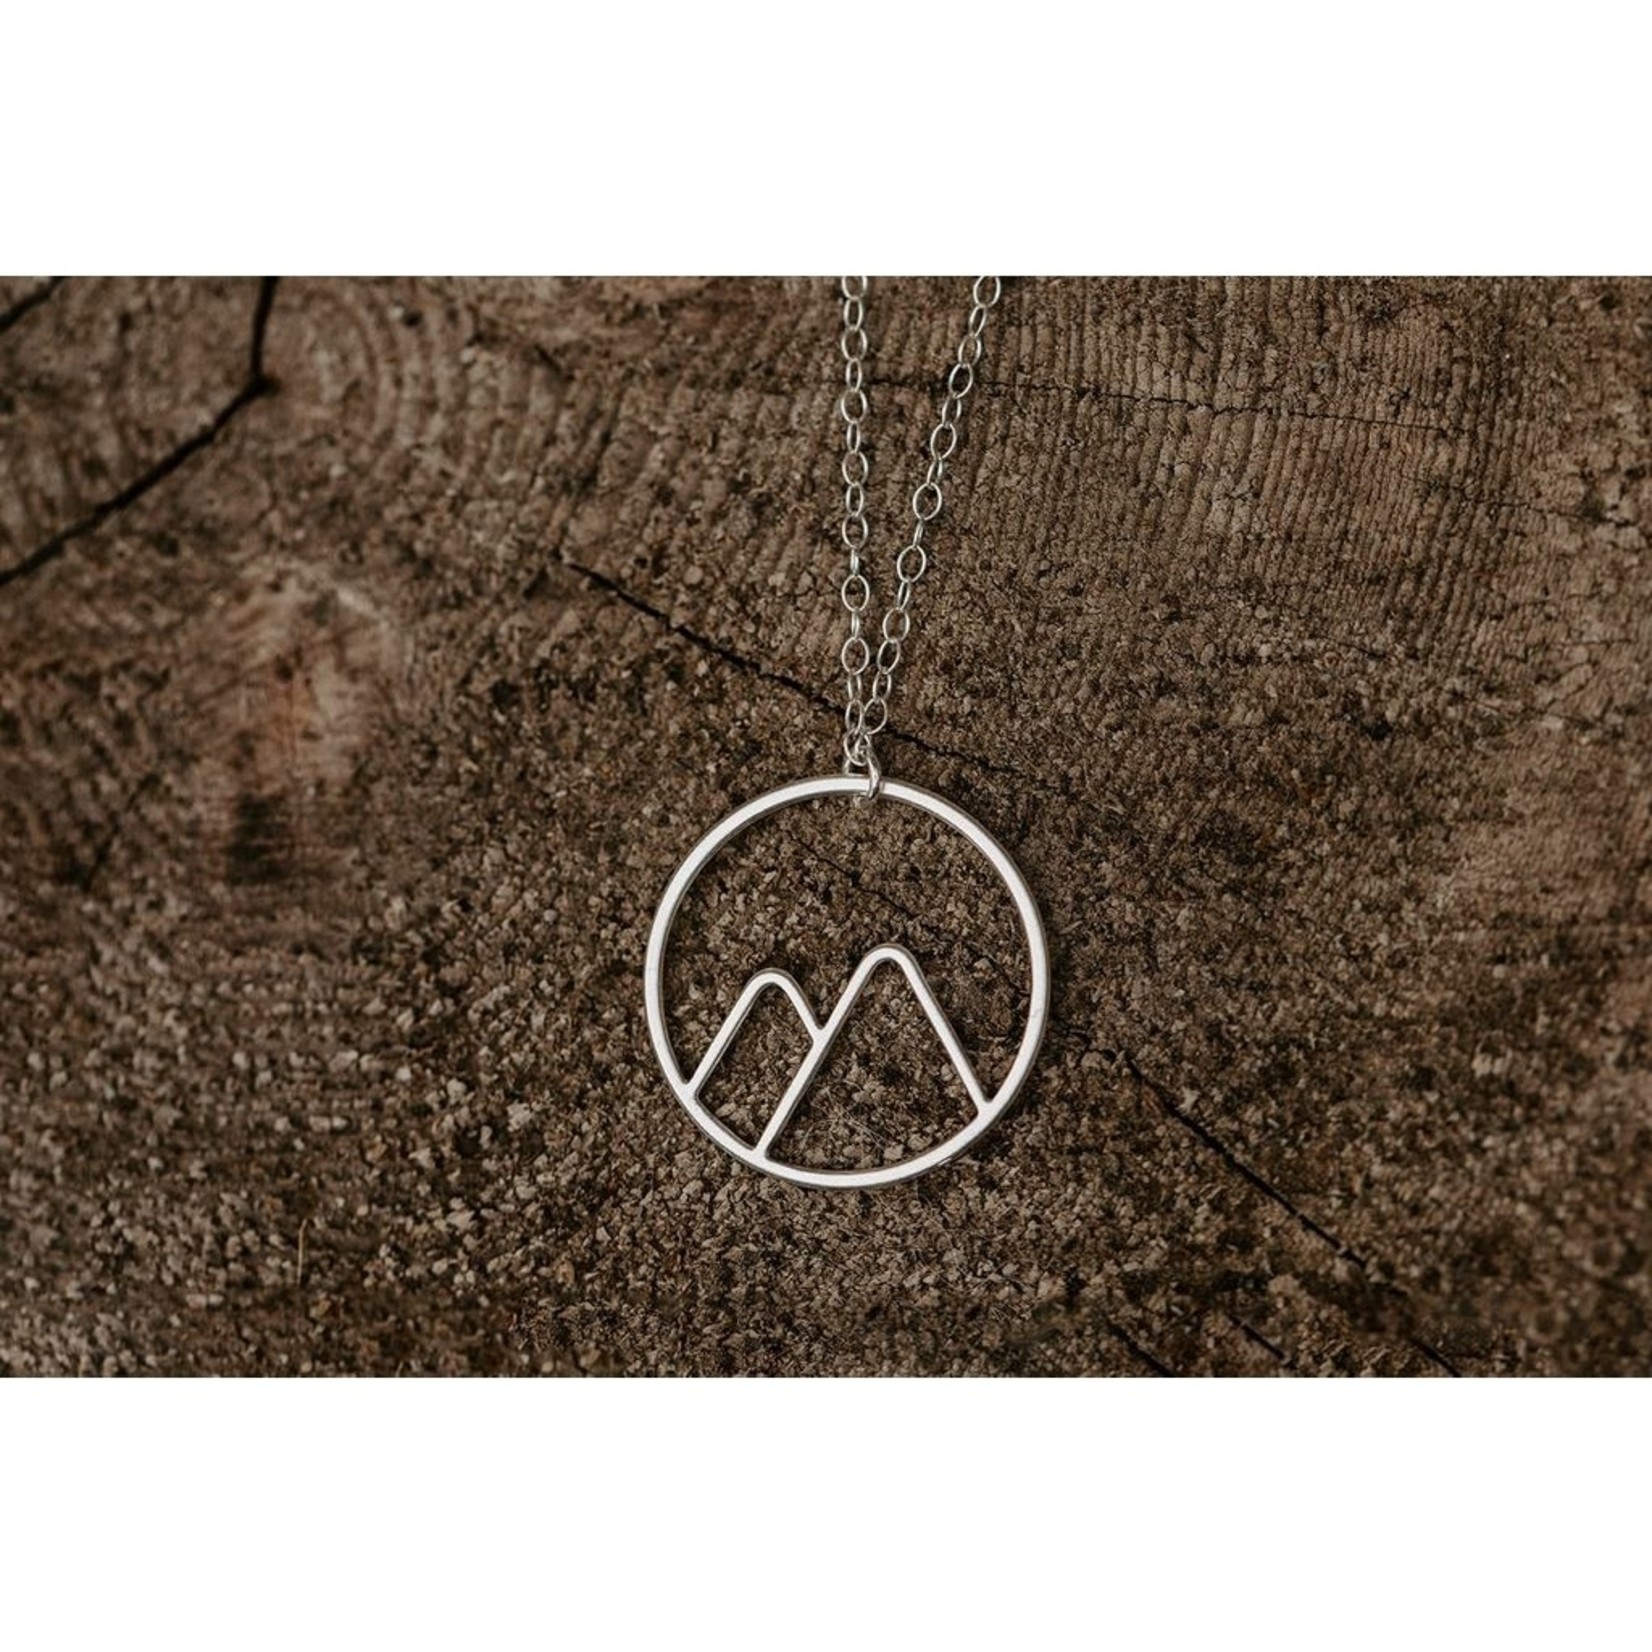 Made of Mountains Twin Peaks Necklace